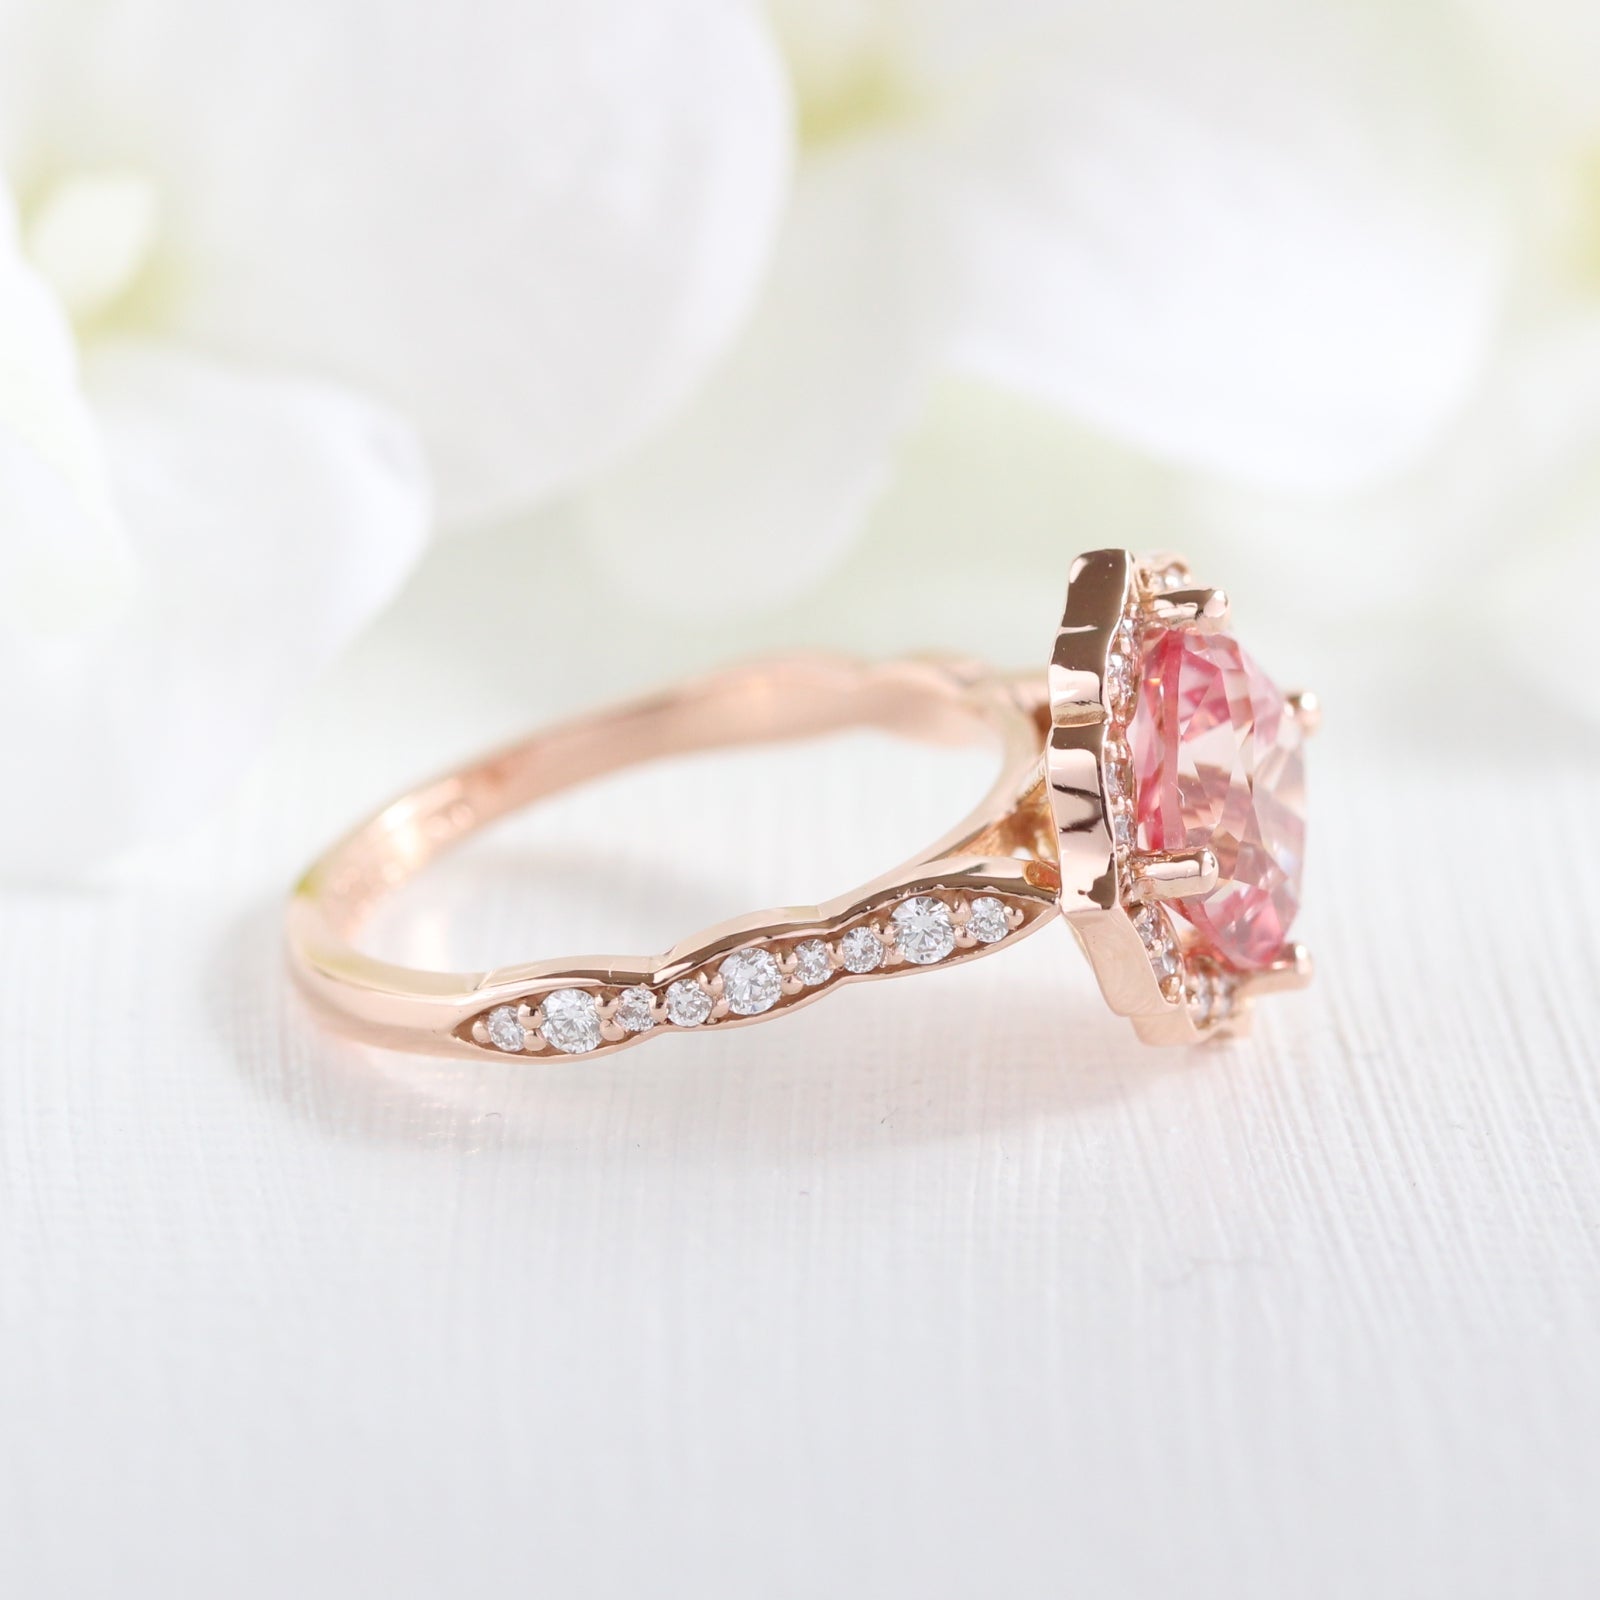 Large Vintage Floral Peach Sapphire Ring in 14k Rose Gold Scalloped Diamond Band, Size 6.5